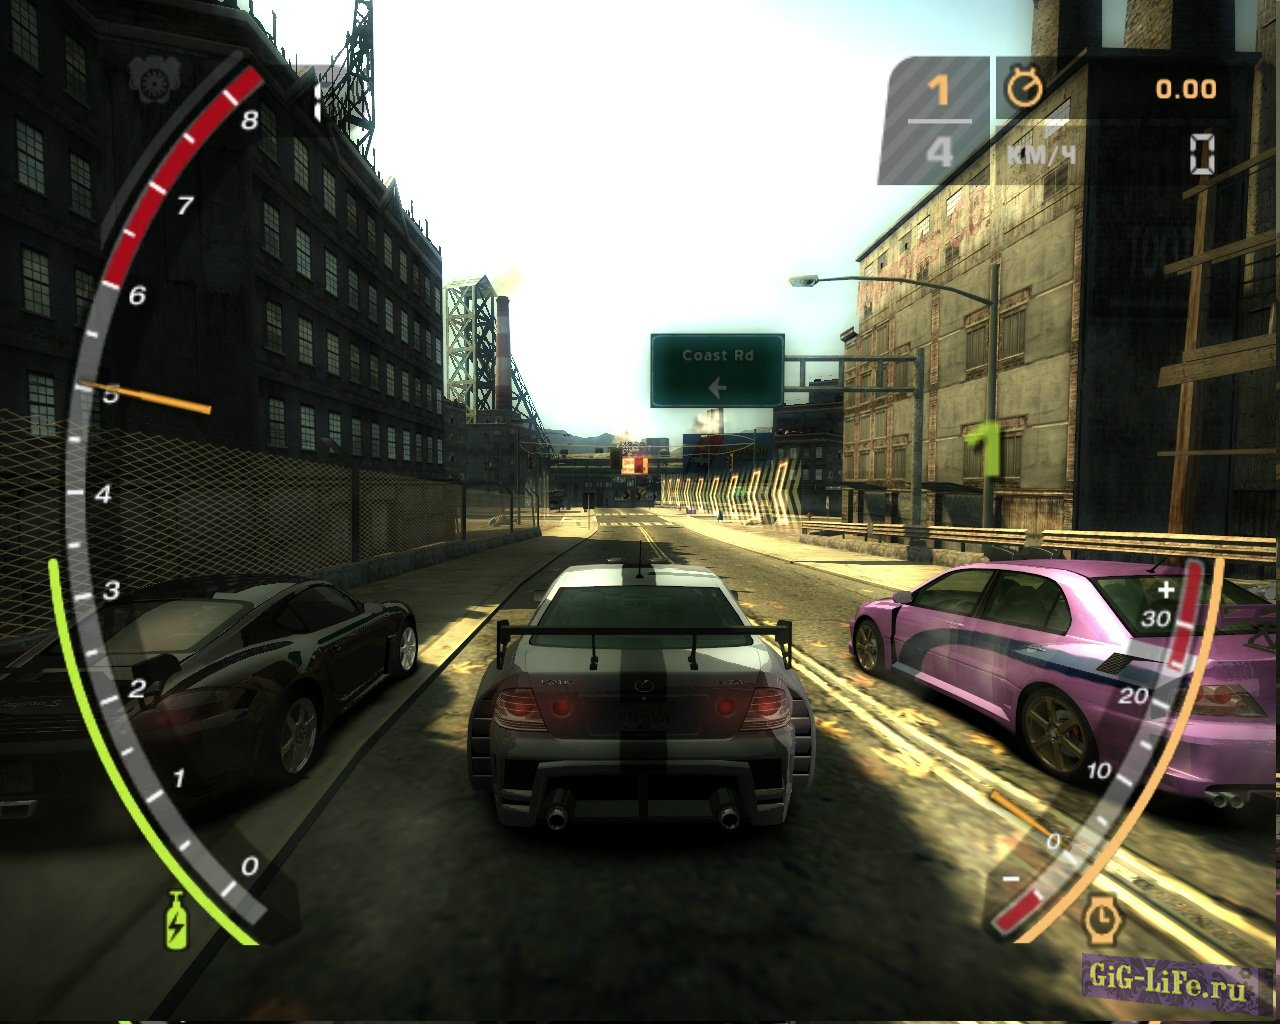 Нид 4 спид. Игра NFS most wanted 2005. Гонки NFS most wanted. Гонки NFS most wanted 2005. NFS Speed most wanted 2005.